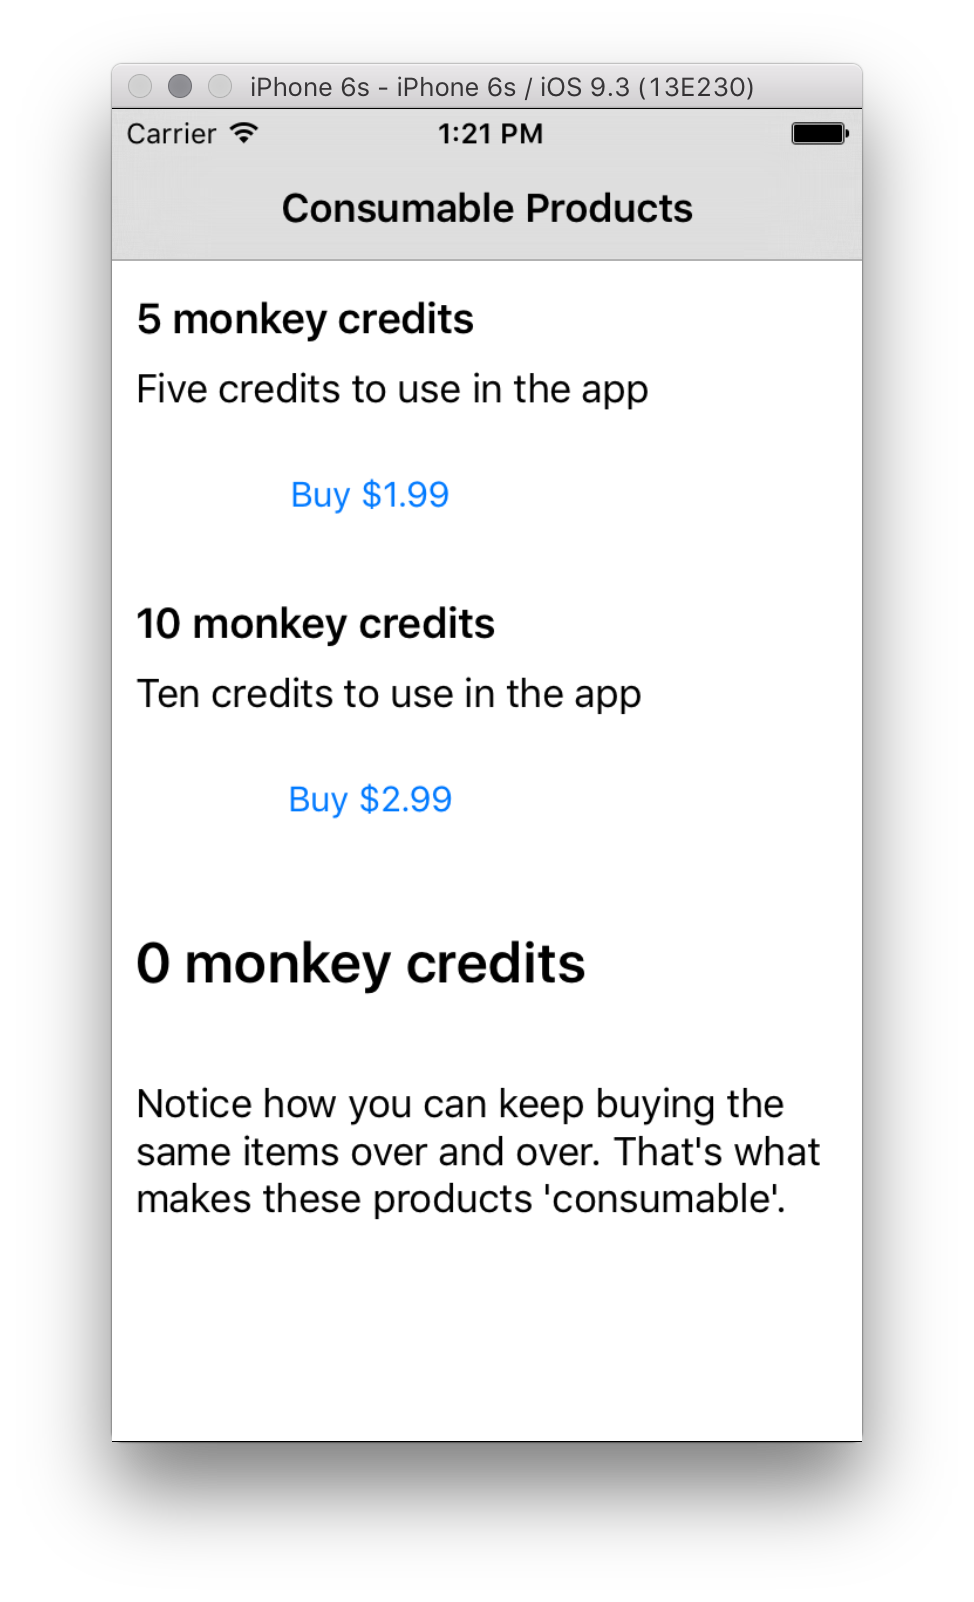 The main screen displays information products  retrieved from the App Store